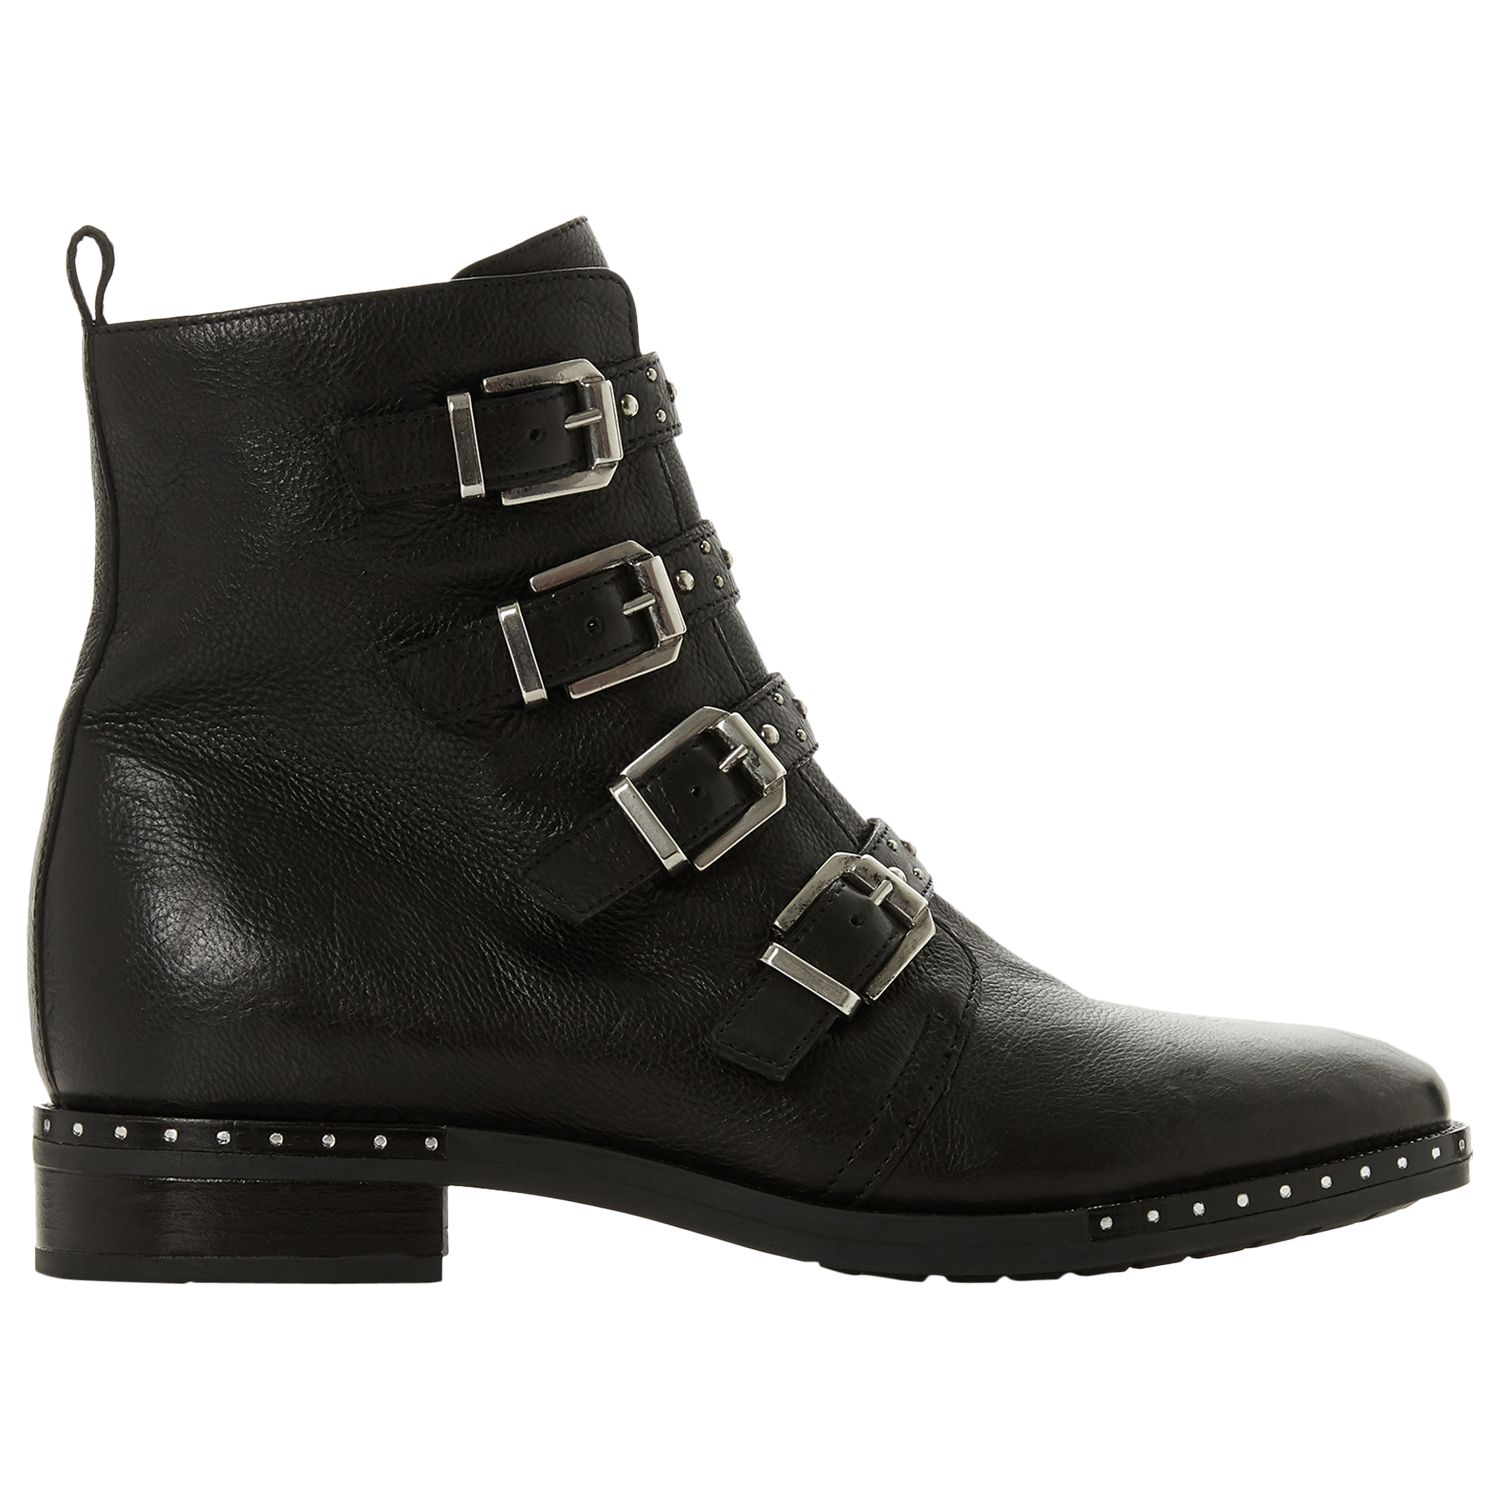 Dune Pixxel Studded Ankle Boots, Black Leather at John Lewis & Partners